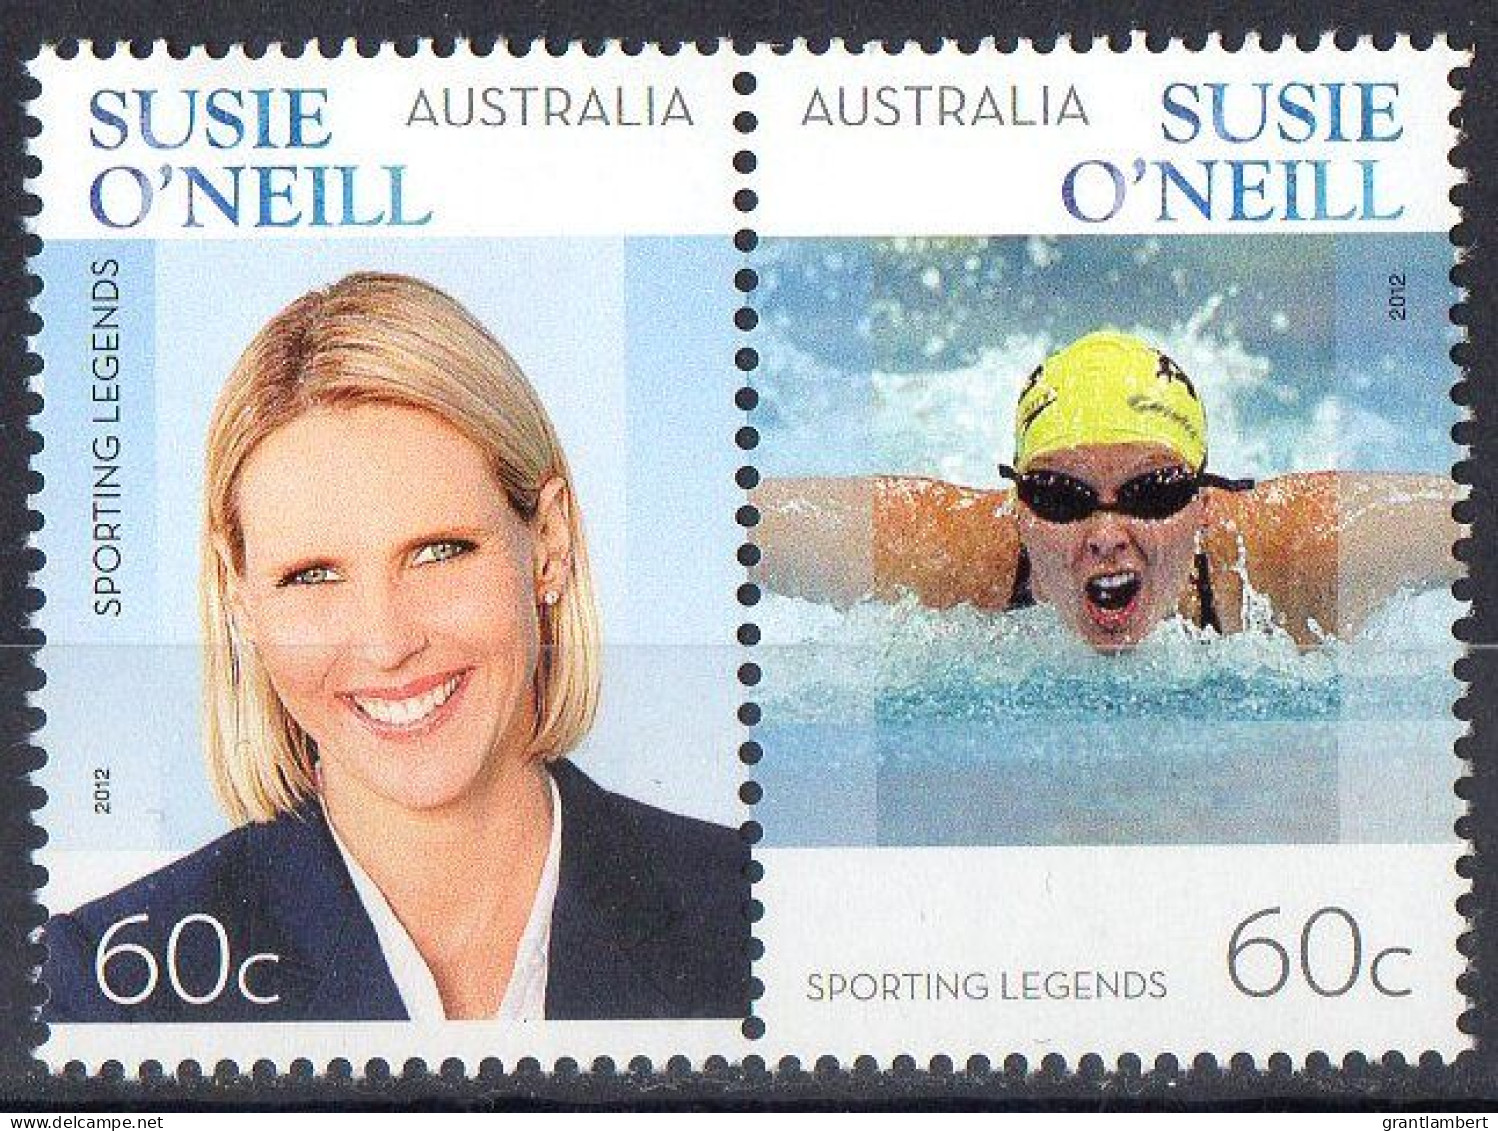 Australia 2012 Sporting Legends - Susie O'Neill 60c Pair MNH - Mint Stamps